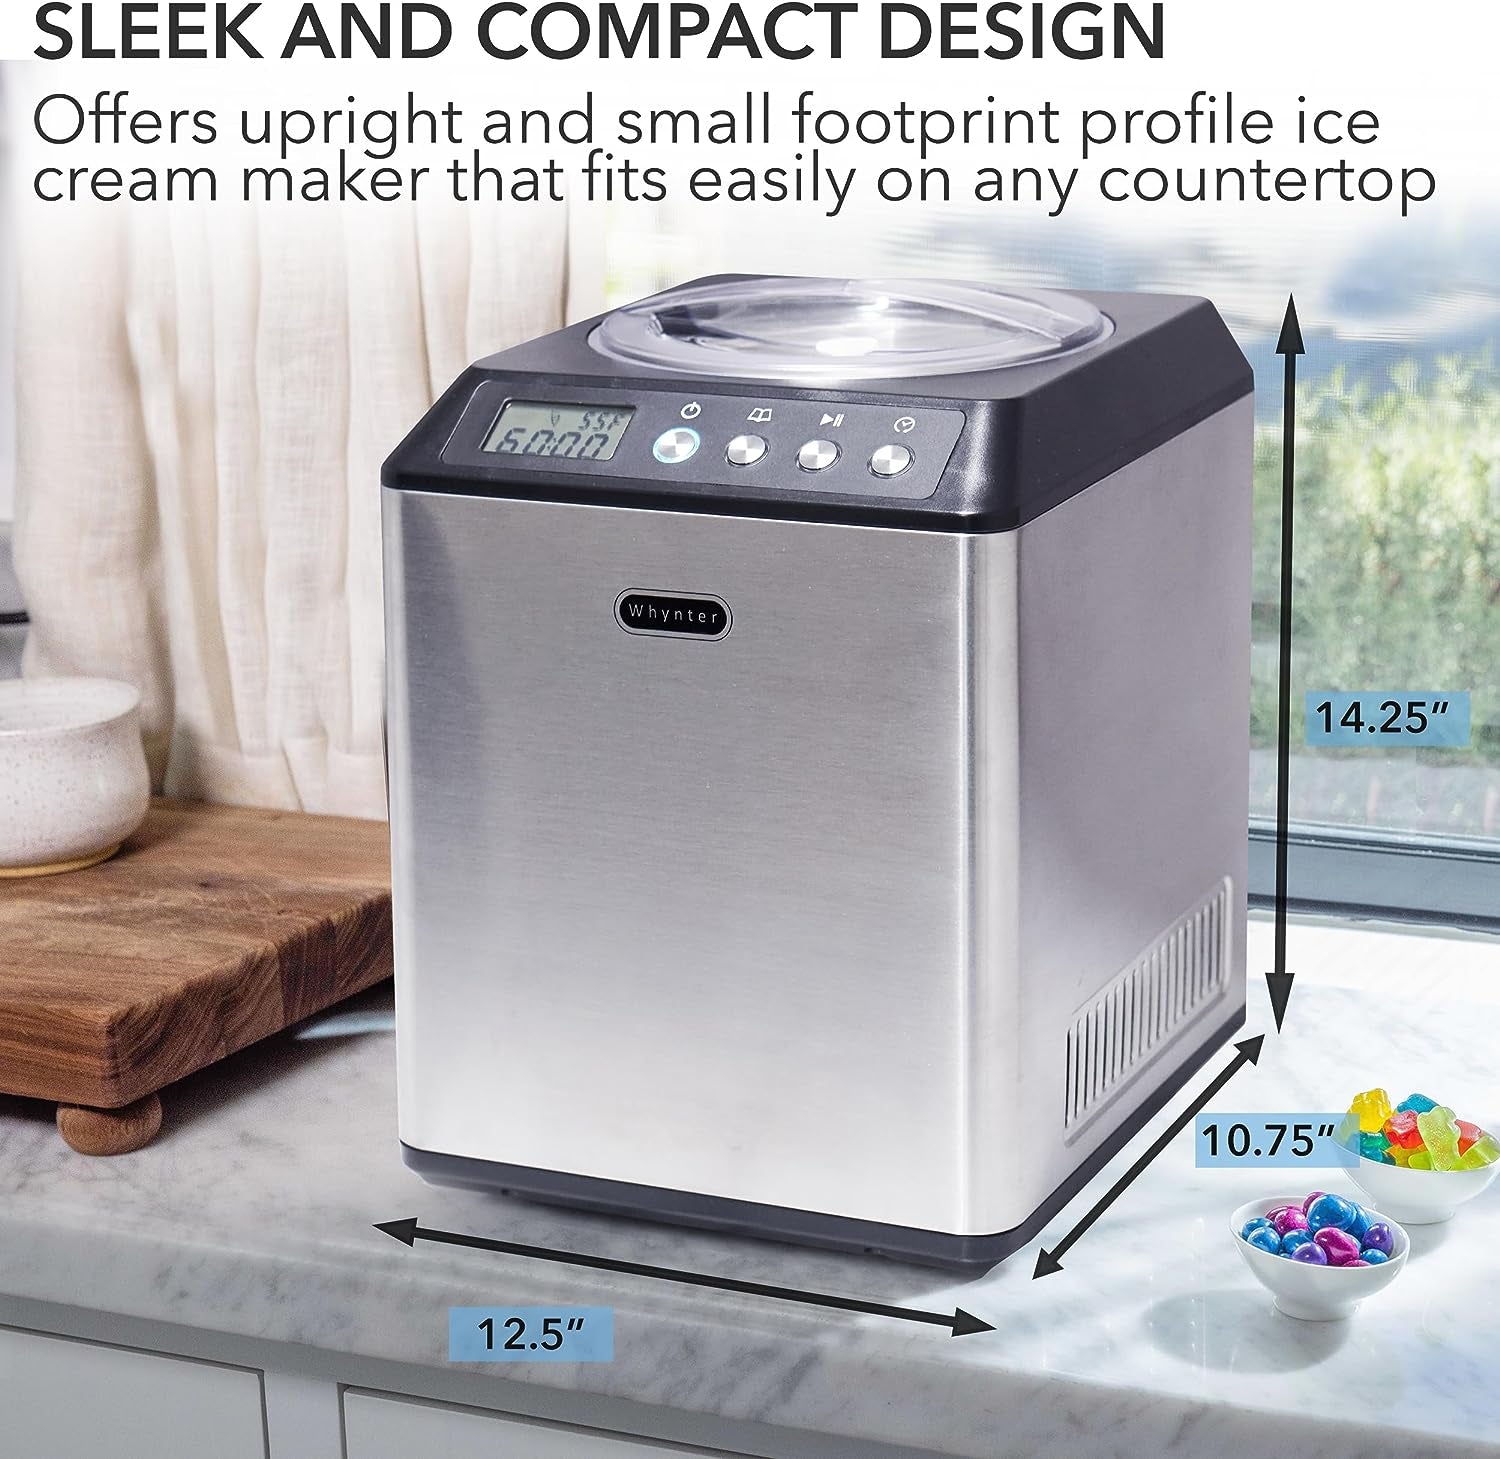 ICM-201SB Upright Automatic Ice Cream Maker with Built-In Compressor, No Pre-Freezing, LCD Digital Display, 2.1 Quart Capacity, Black